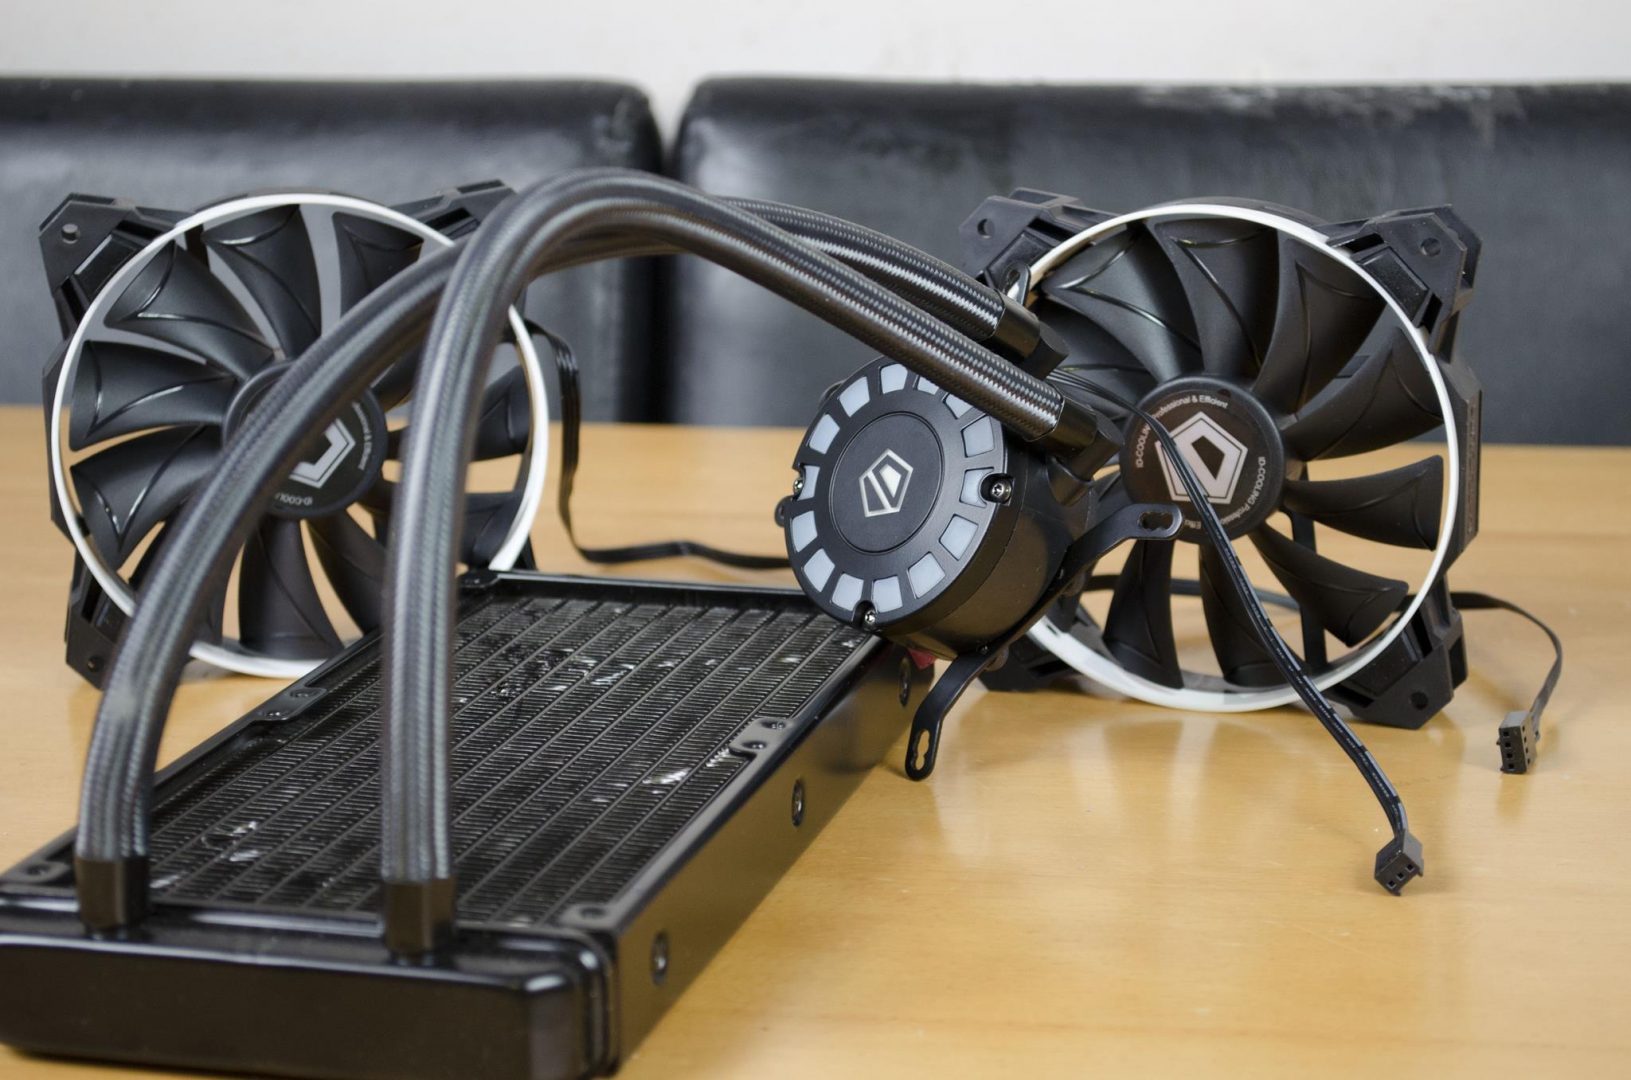 ID-Cooling FROSTFLOW 240L AIO CPU Cooler Review